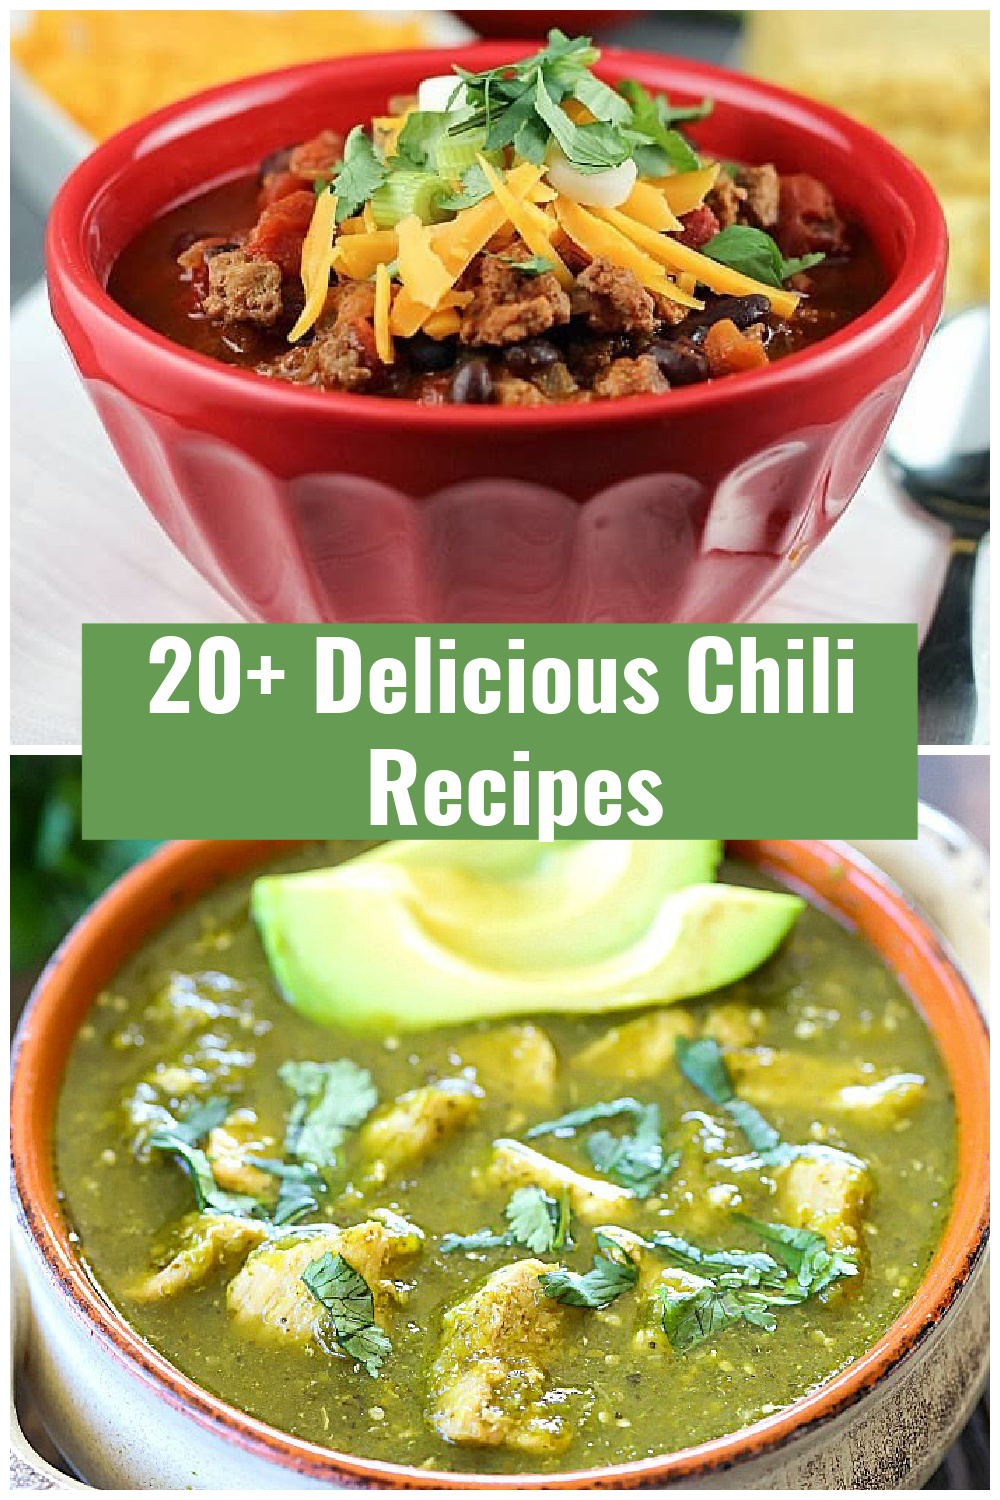  It's that time of year! Time for a giant bowl full of chili! Here are over 20 Chili Recipes that you NEED to make this season. Check out this 20+ Chili Round Up for some great ideas on what chili recipes you need to try! #chili #roundup #dinner #dinnerideas #recipes via @jennikolaus